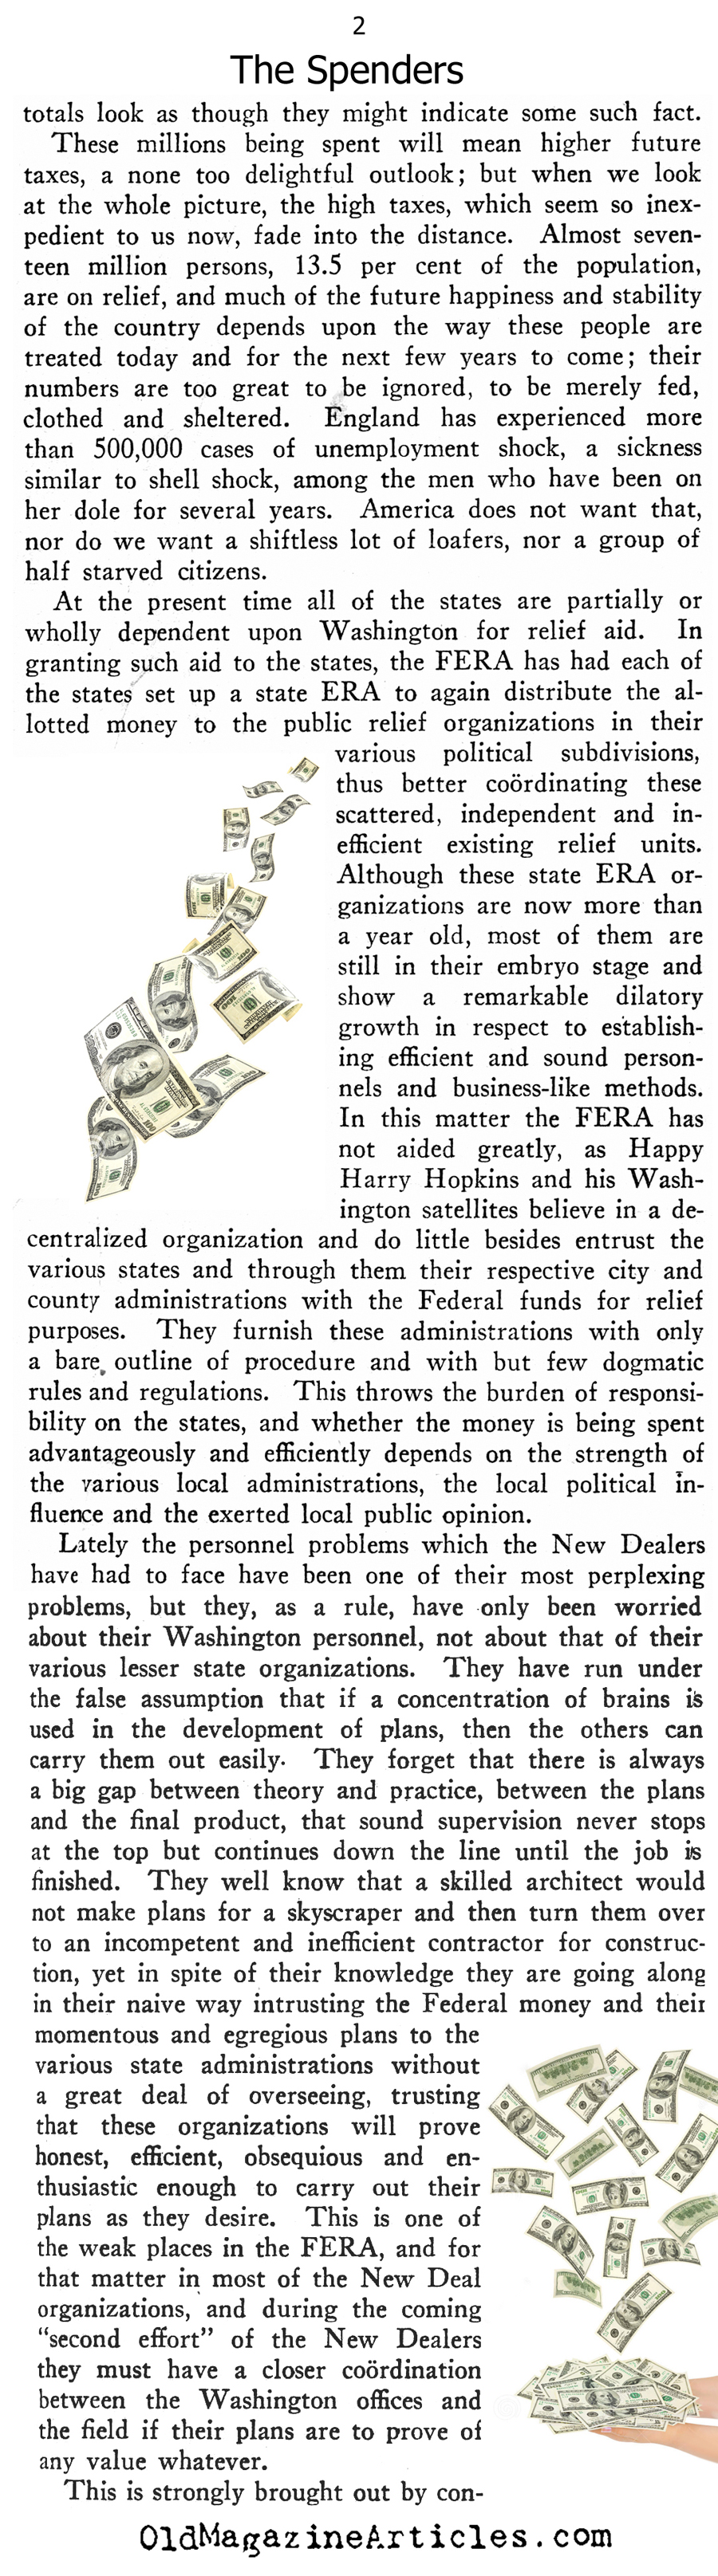 The Big Spenders in Washington (New Outlook Magazine, 1934)